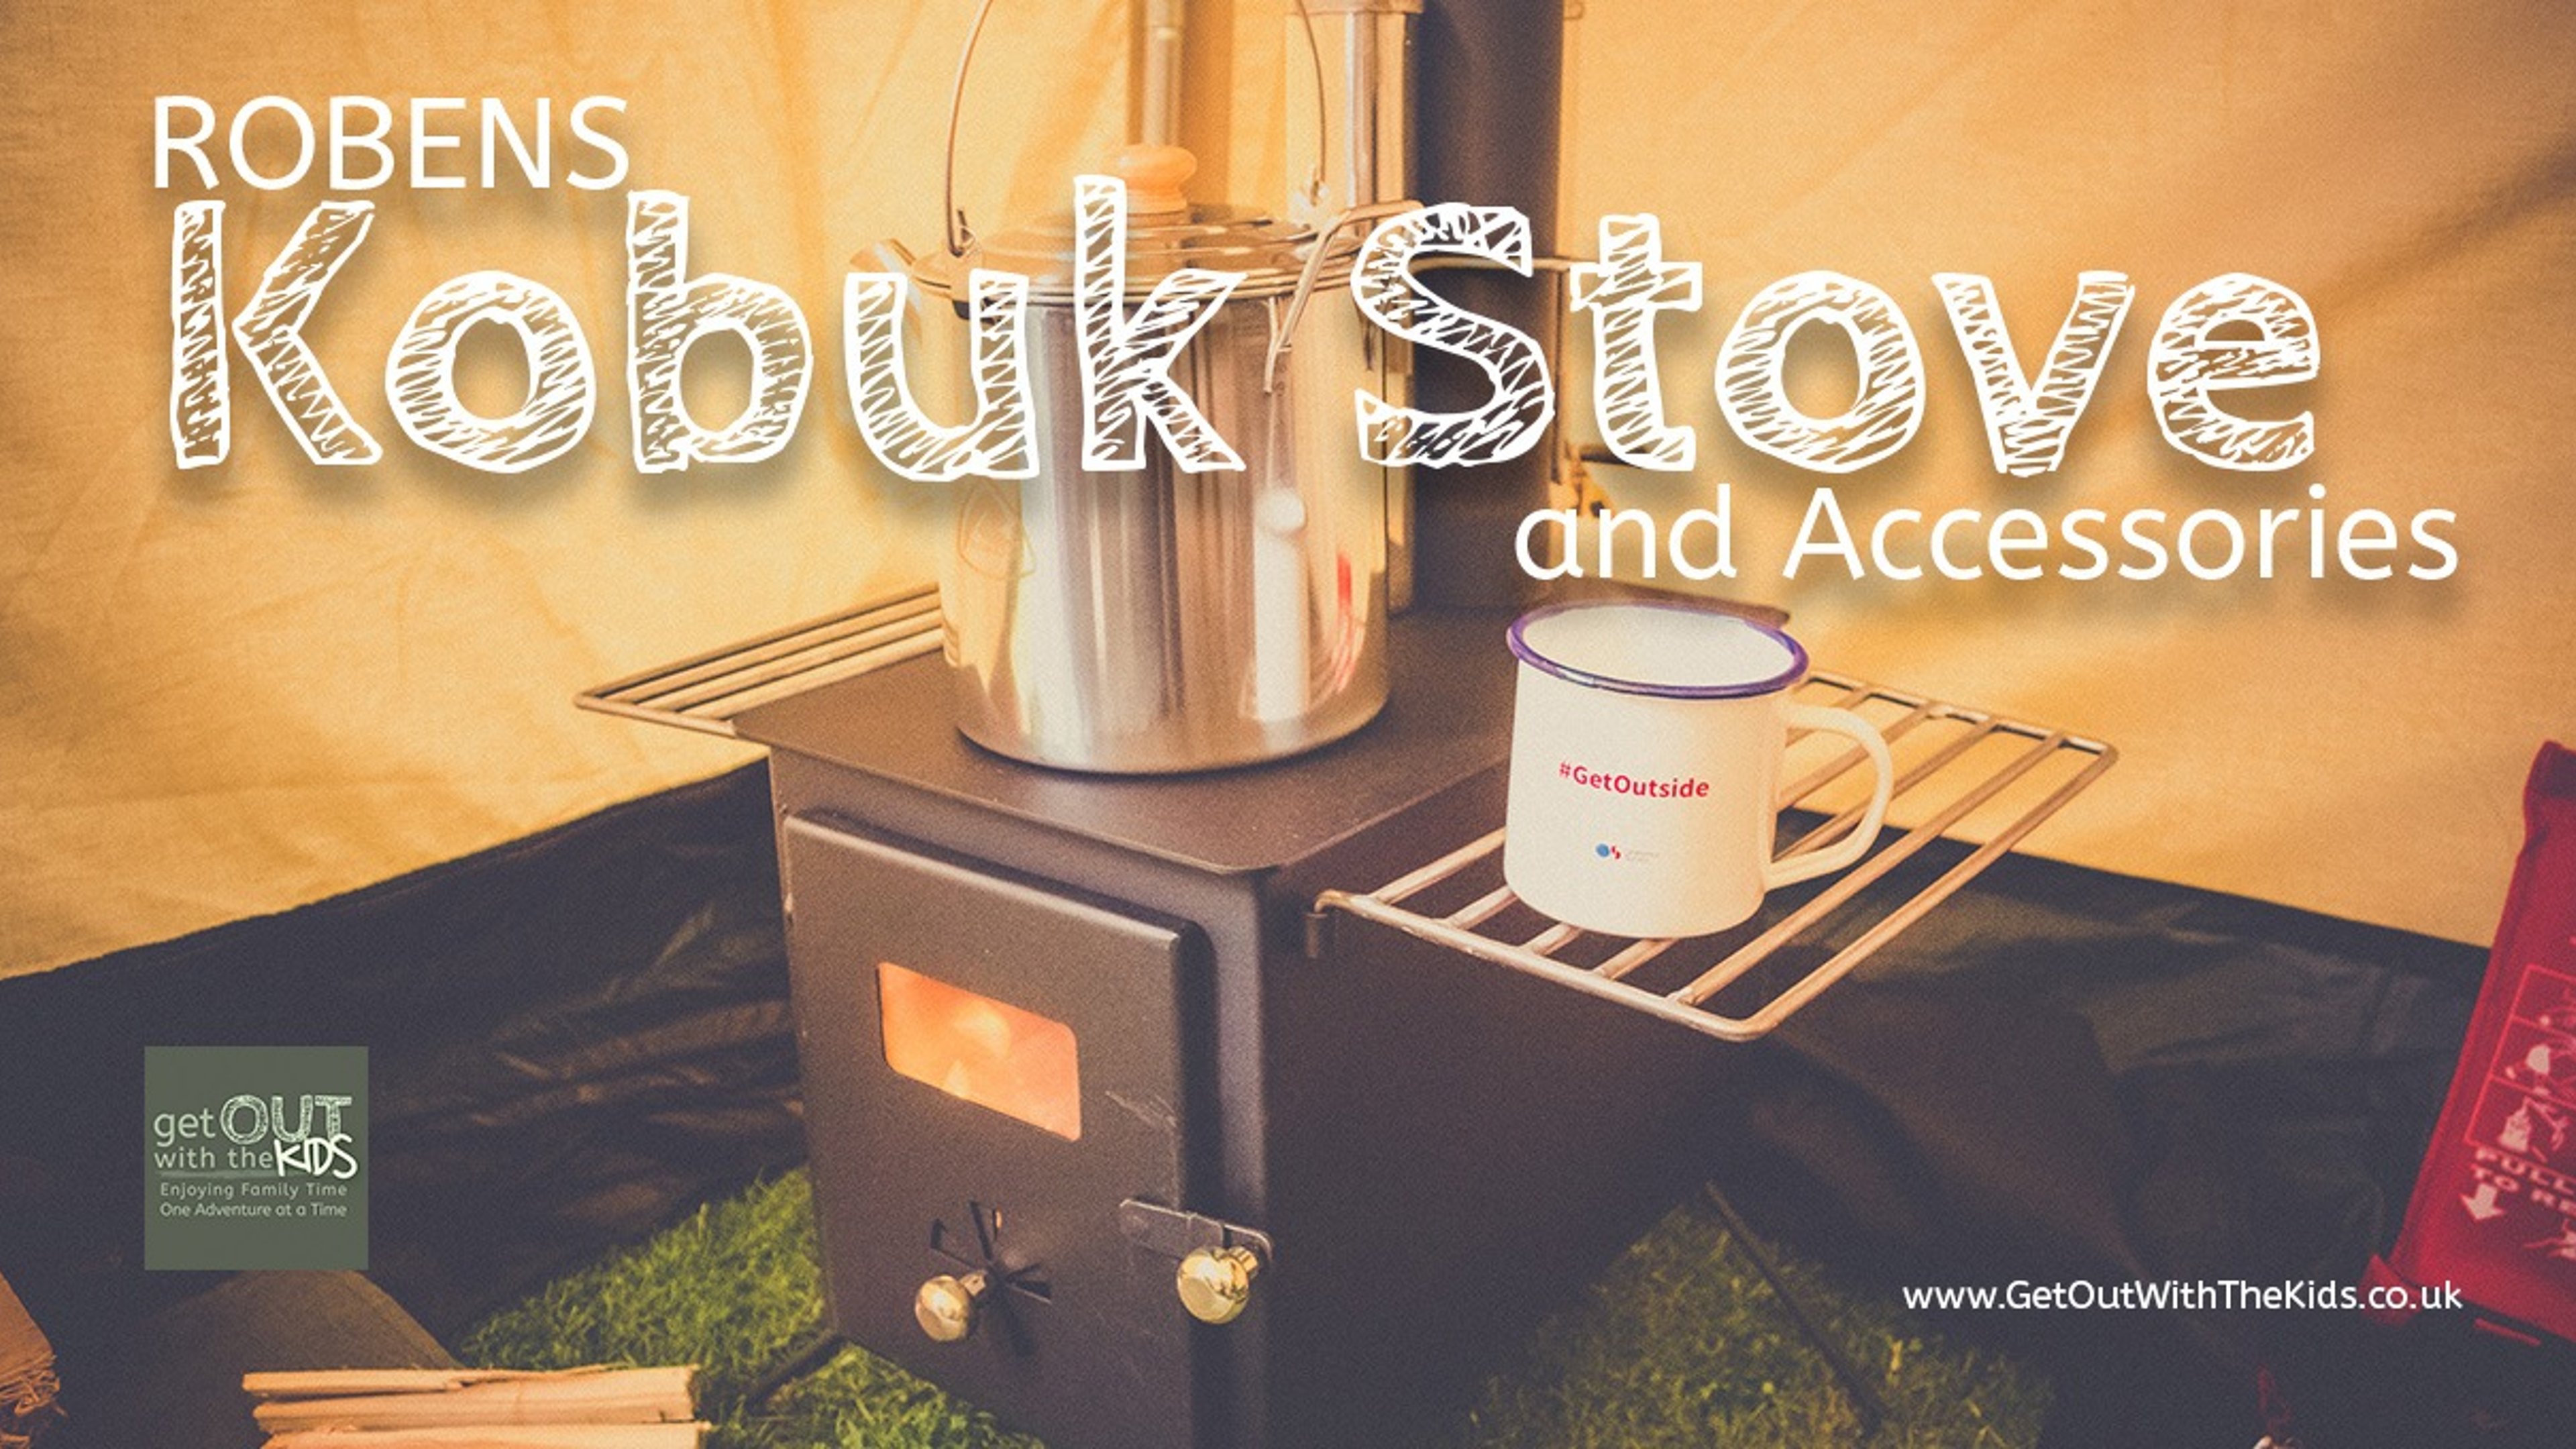 Robens Kobuk Stove in our tent